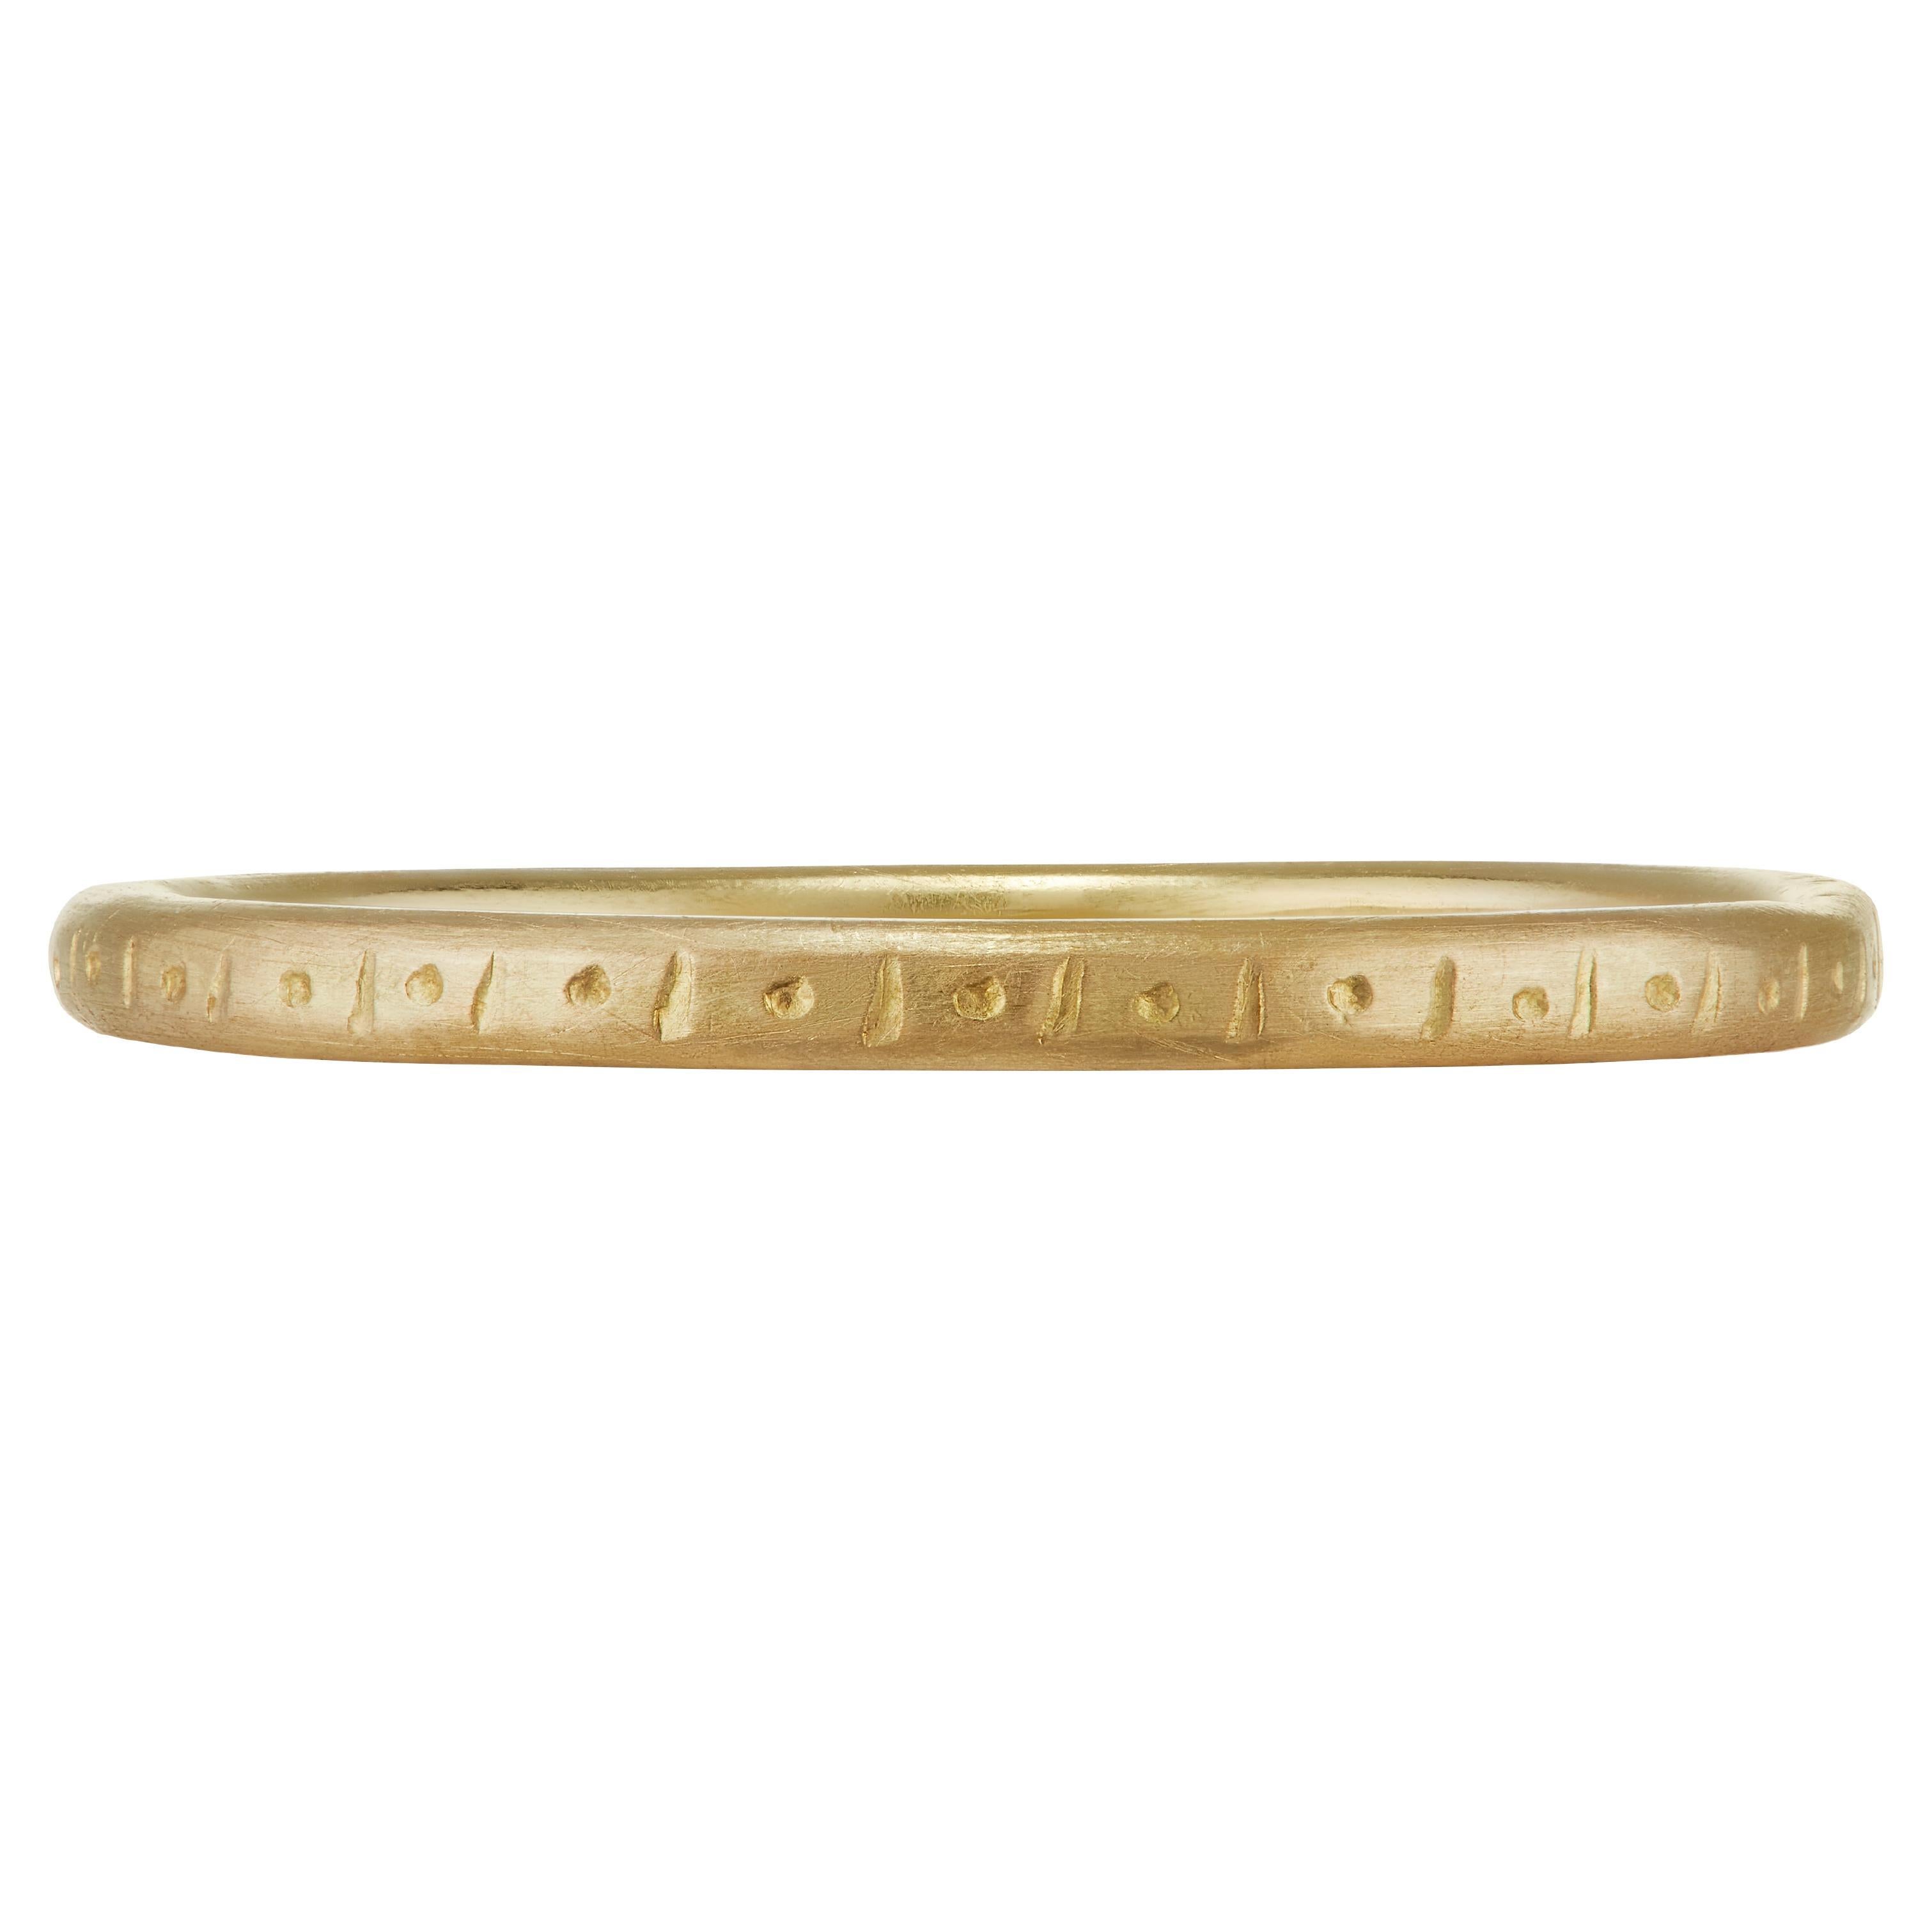 The Jarti Ethical Ehering 18ct Fairmined Gold, Ethical